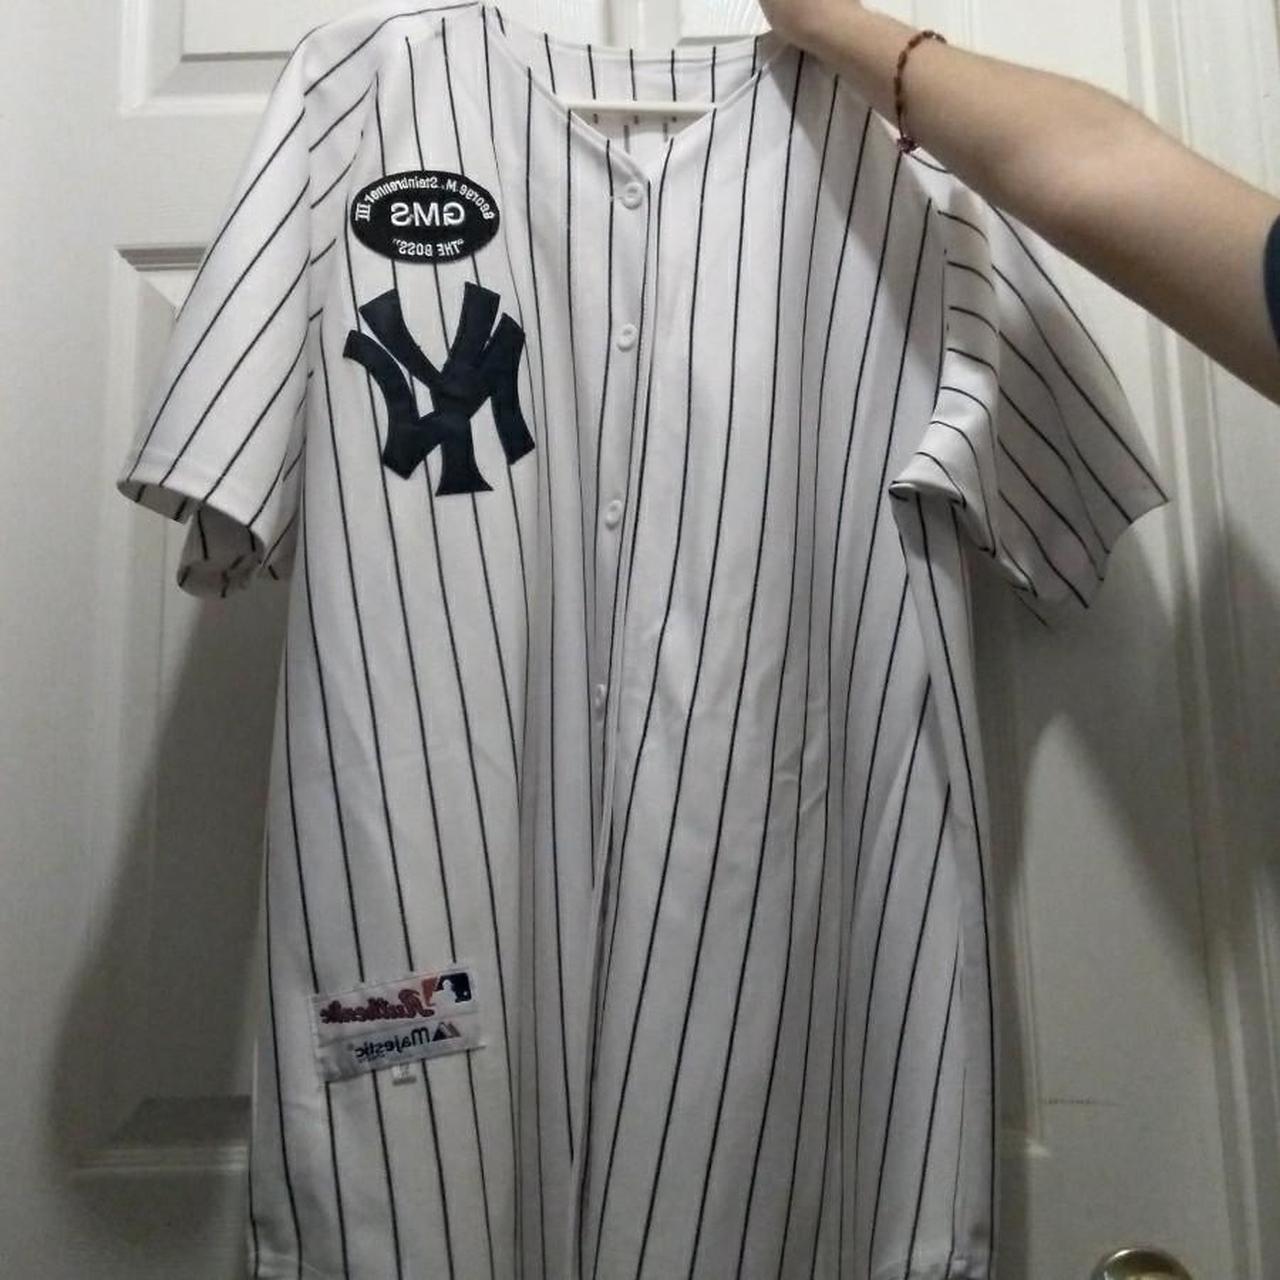 Authentic New York Yankees adidas jersey This - Depop